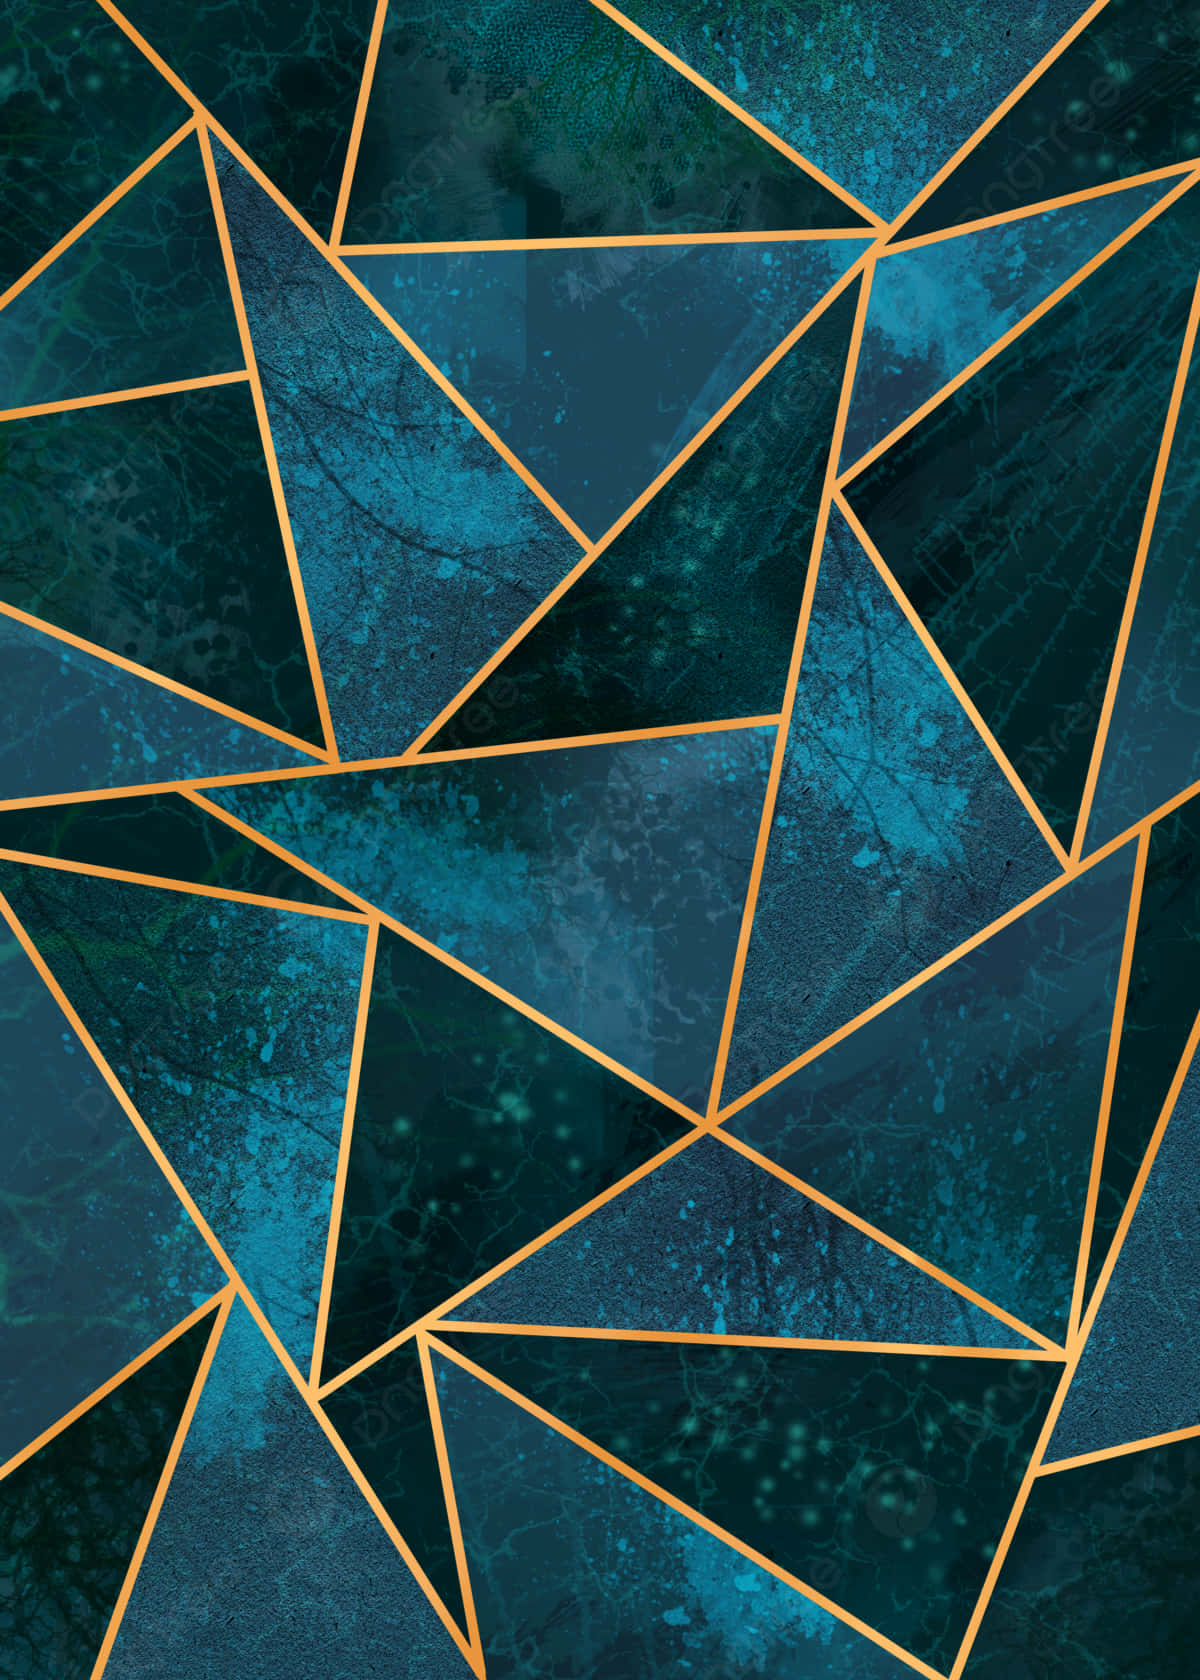 A Geometric Background With Gold And Blue Triangles